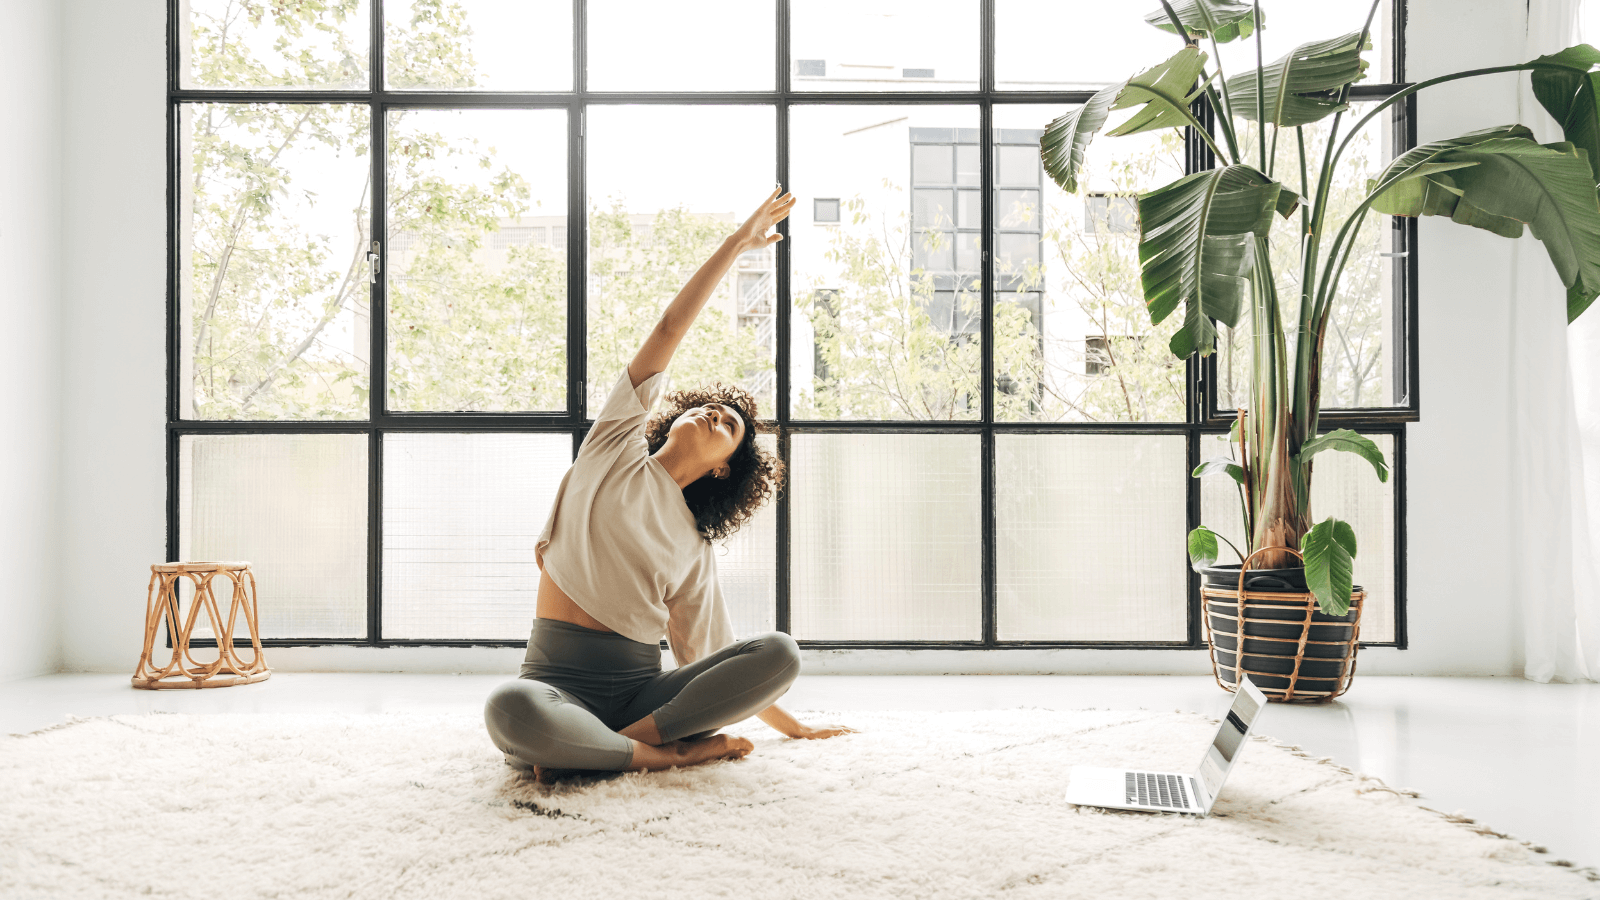 Yoga for PCOD: 5 Simple Poses That Can Help